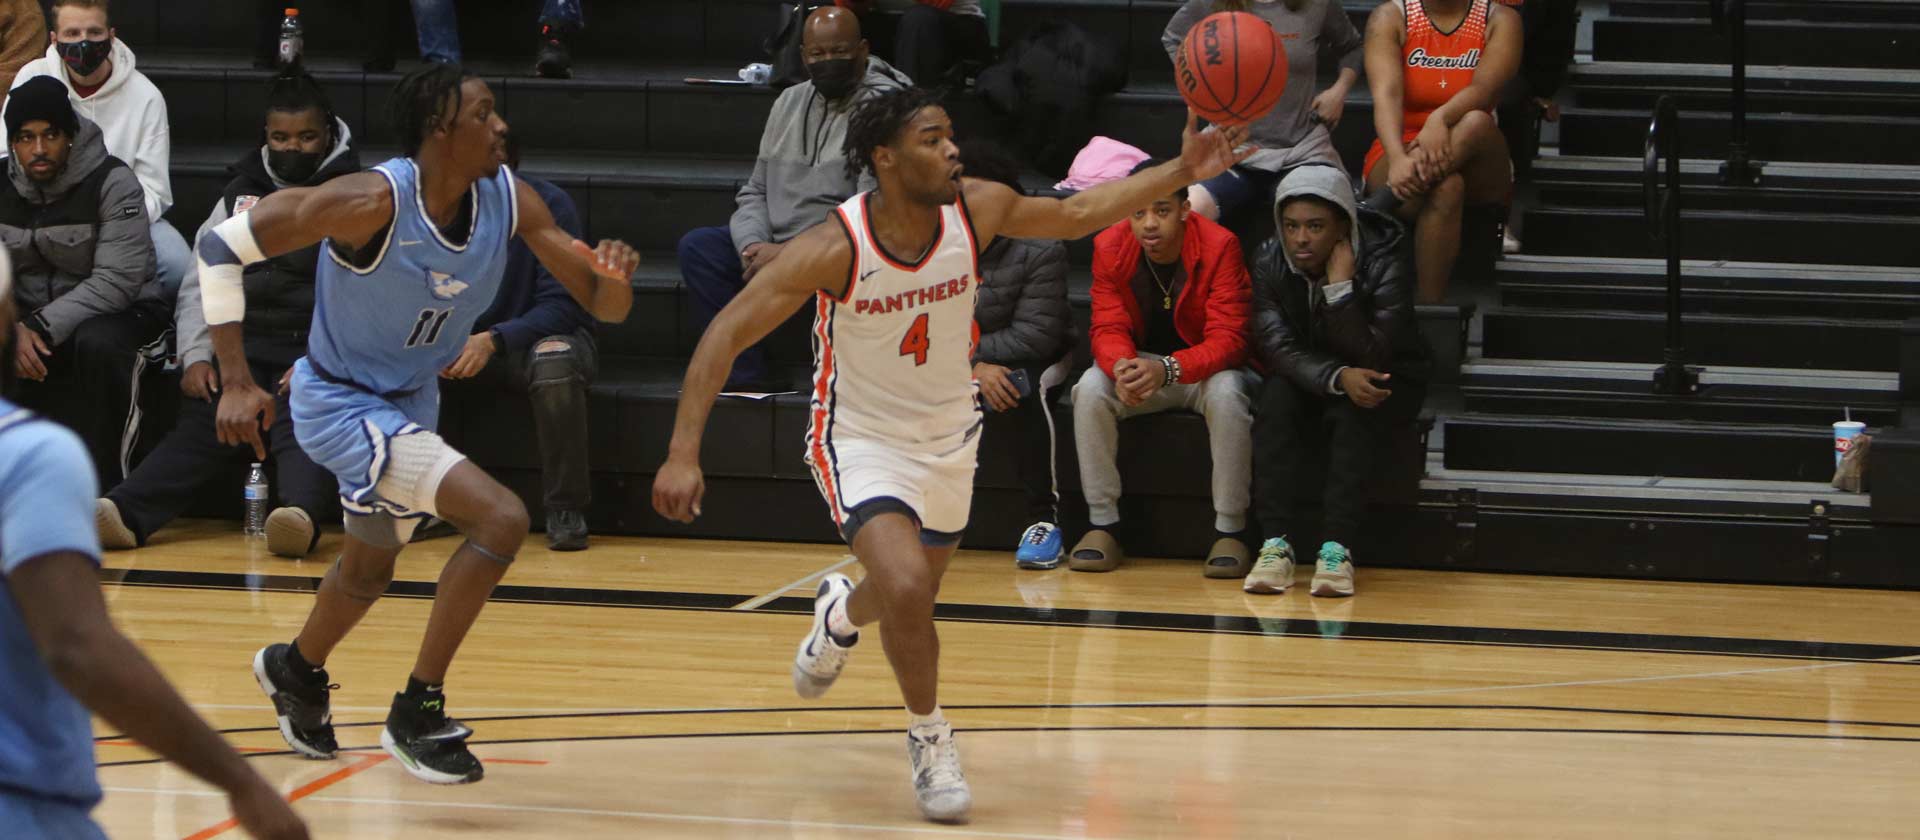 Men's basketball topped by Westminster as they seek first conference win